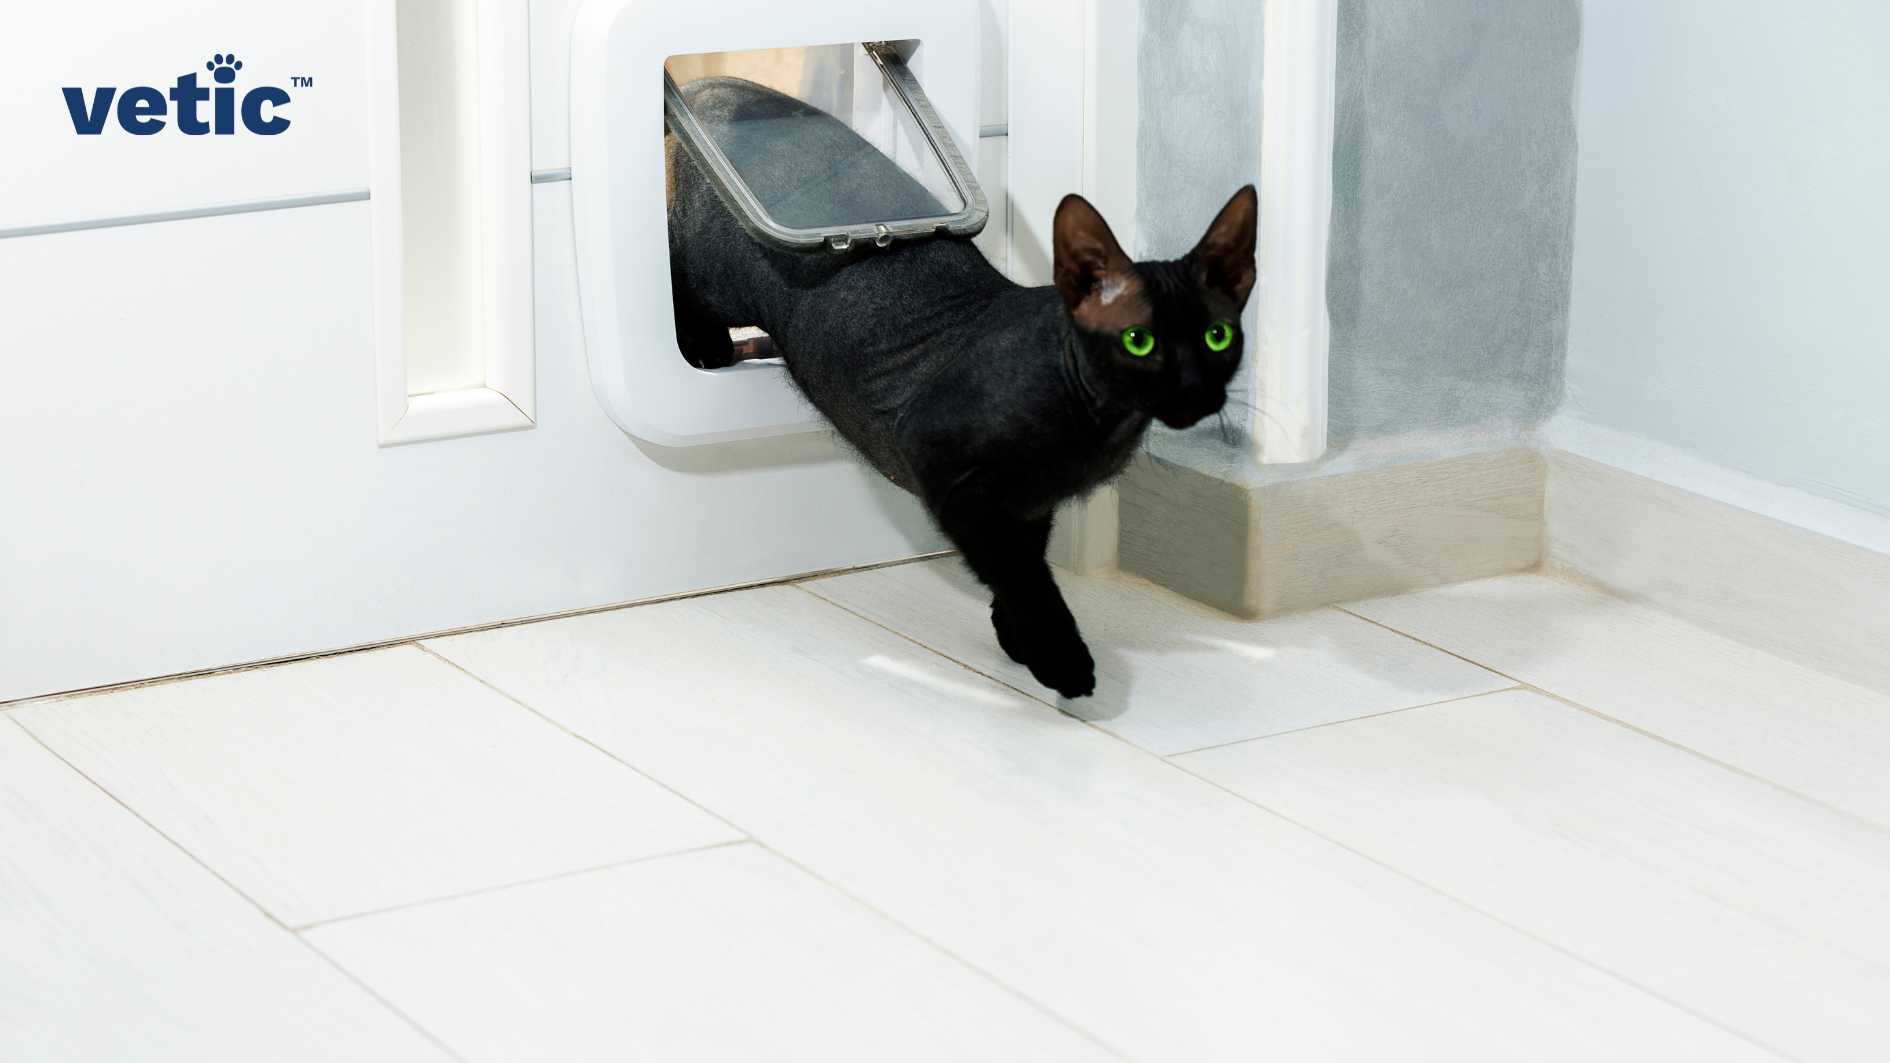 A black, indoor-outdoor cat, with green eyes coming through a cat flap.